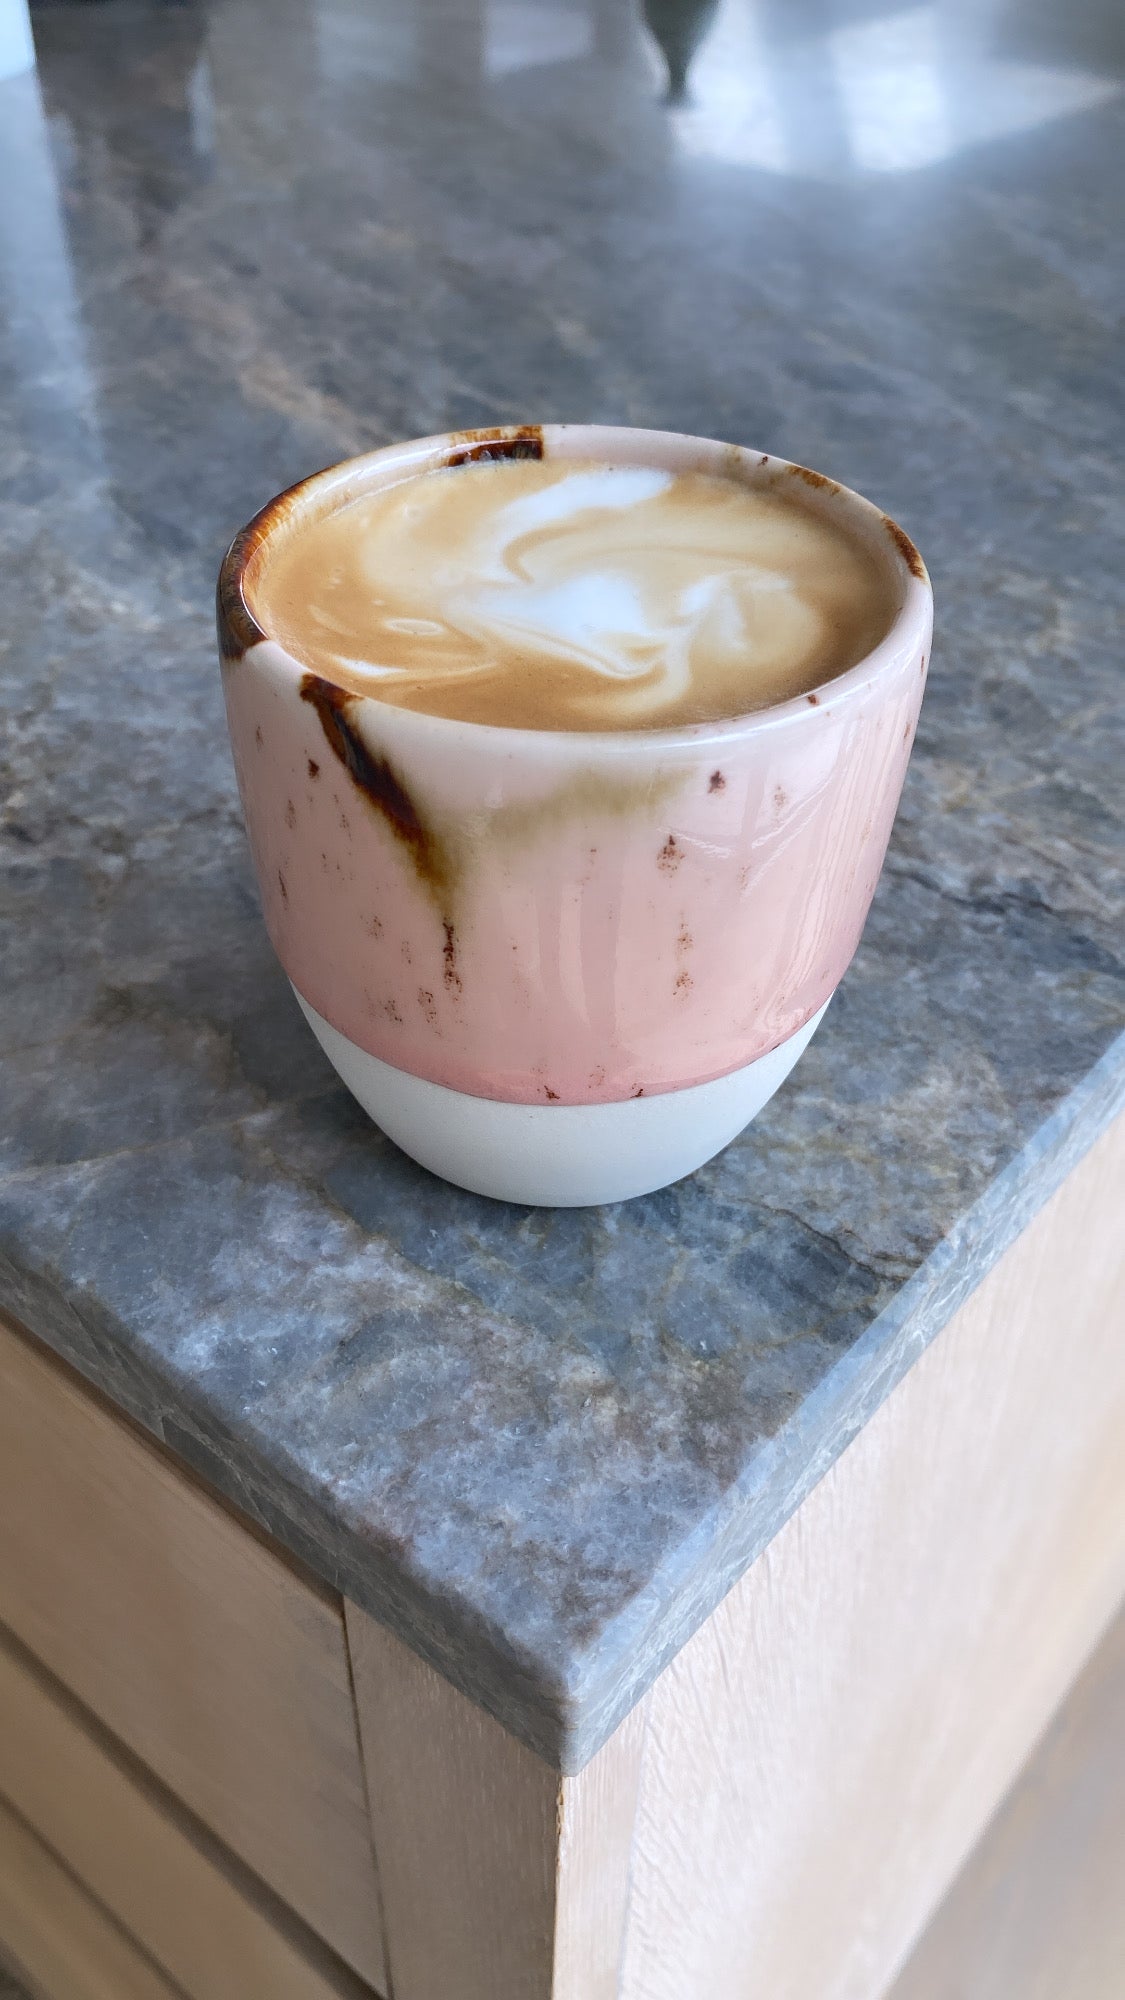 Kim Wallace to-go latte cup Sundae - pink unique glaze. Lid in nude